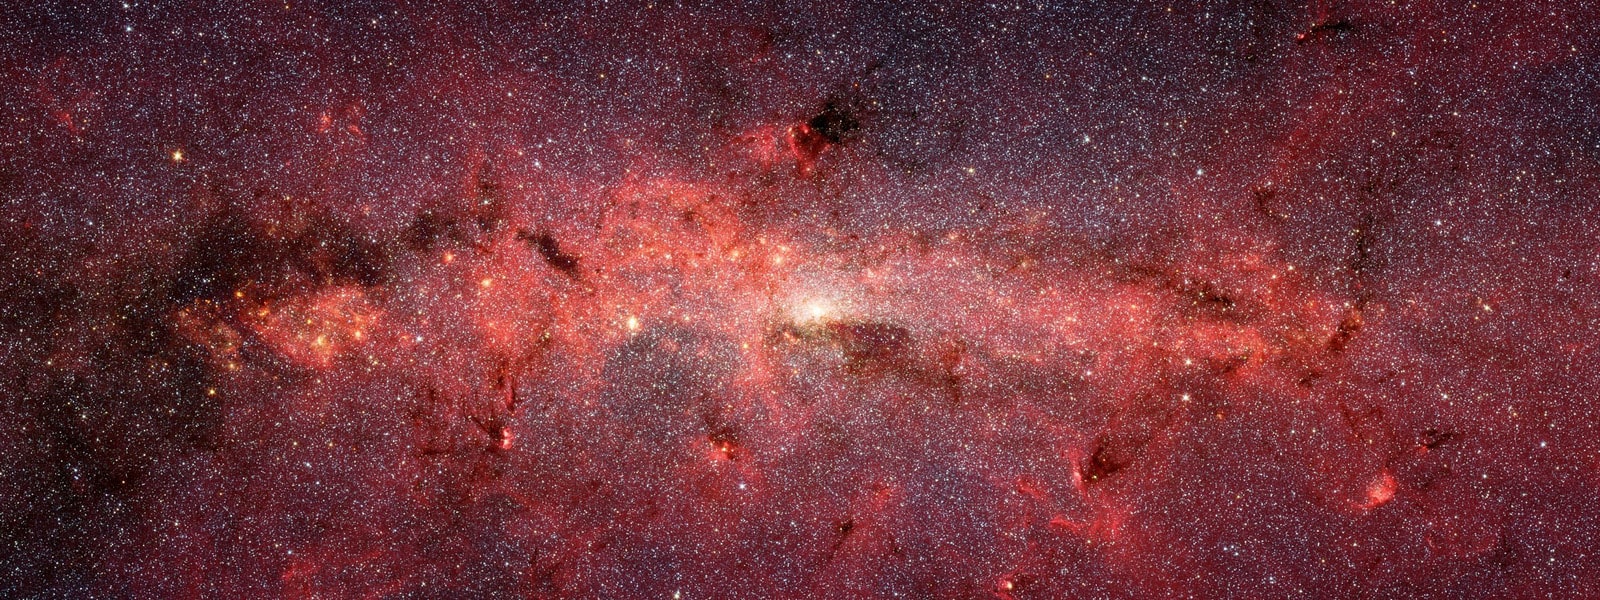 Dust, gas and stars in space